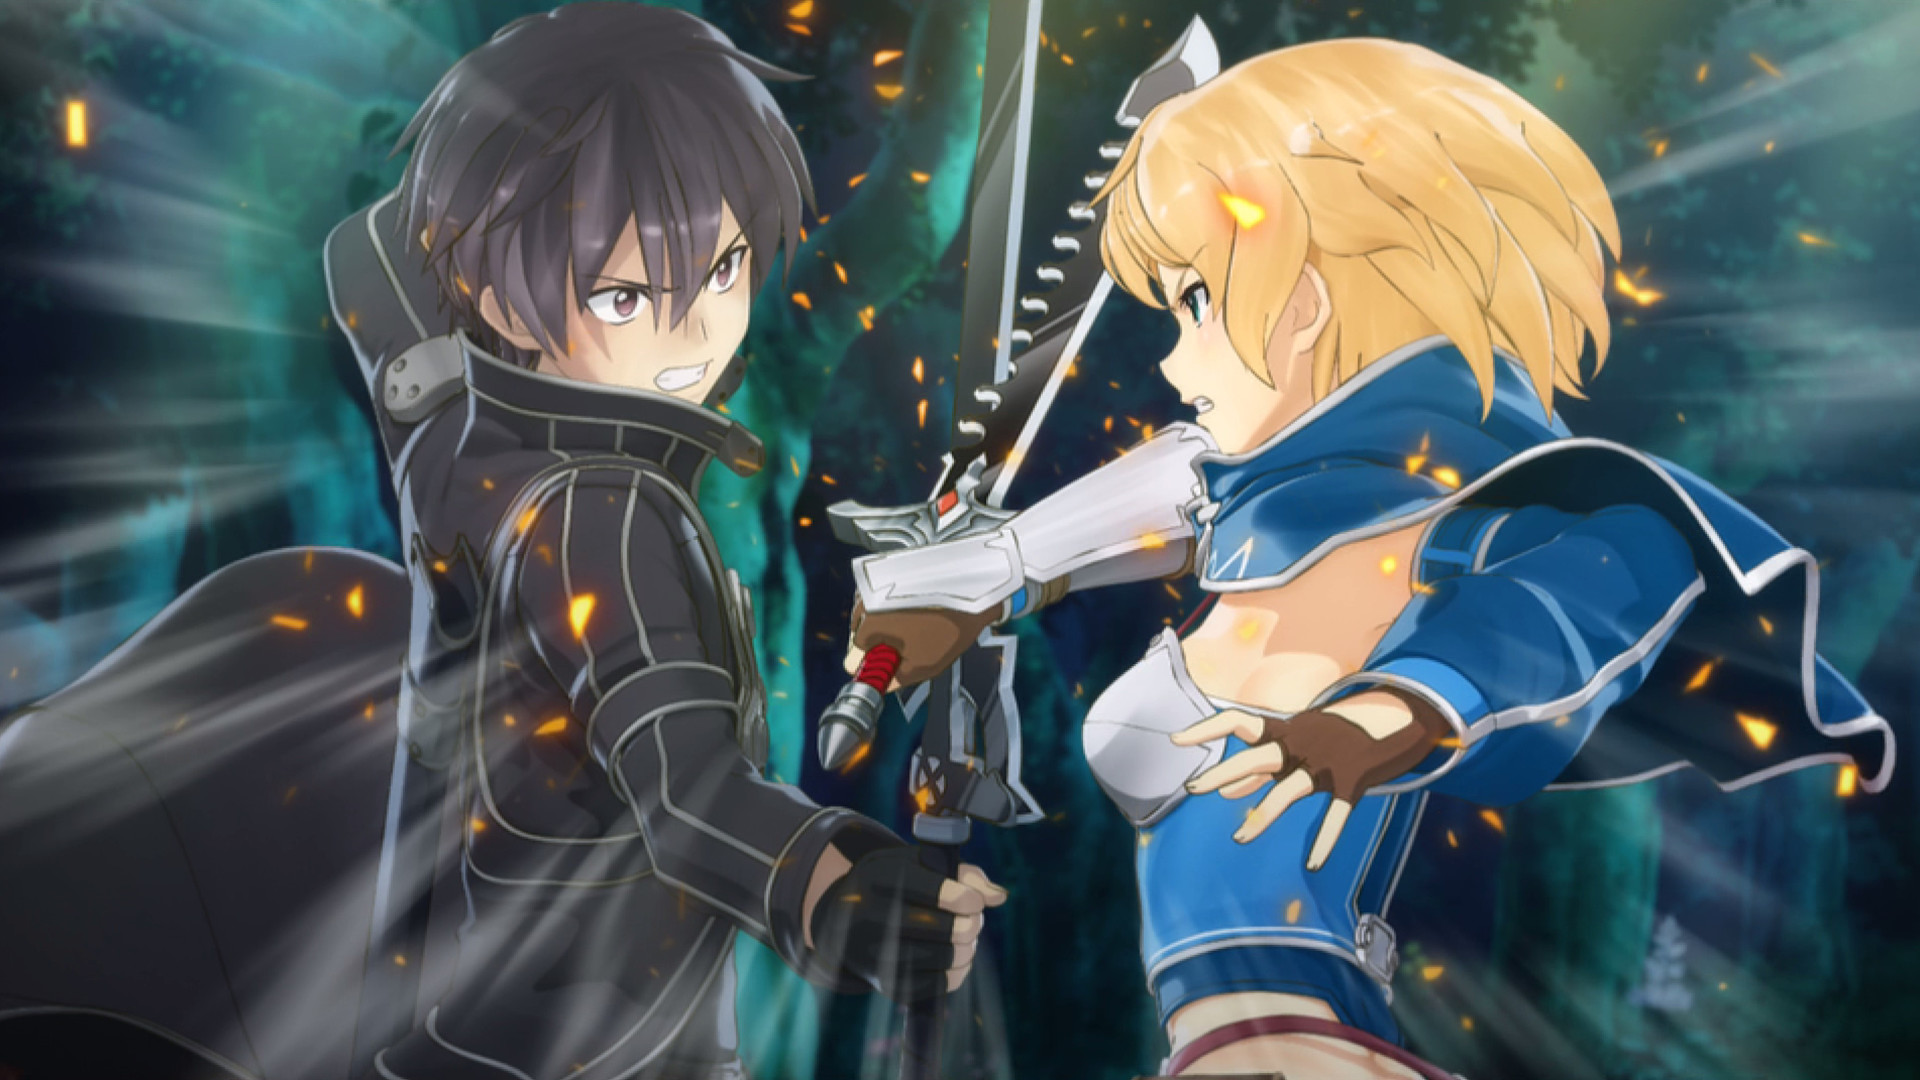 Not so realized - Sword Art Online: Hollow Fragment Review